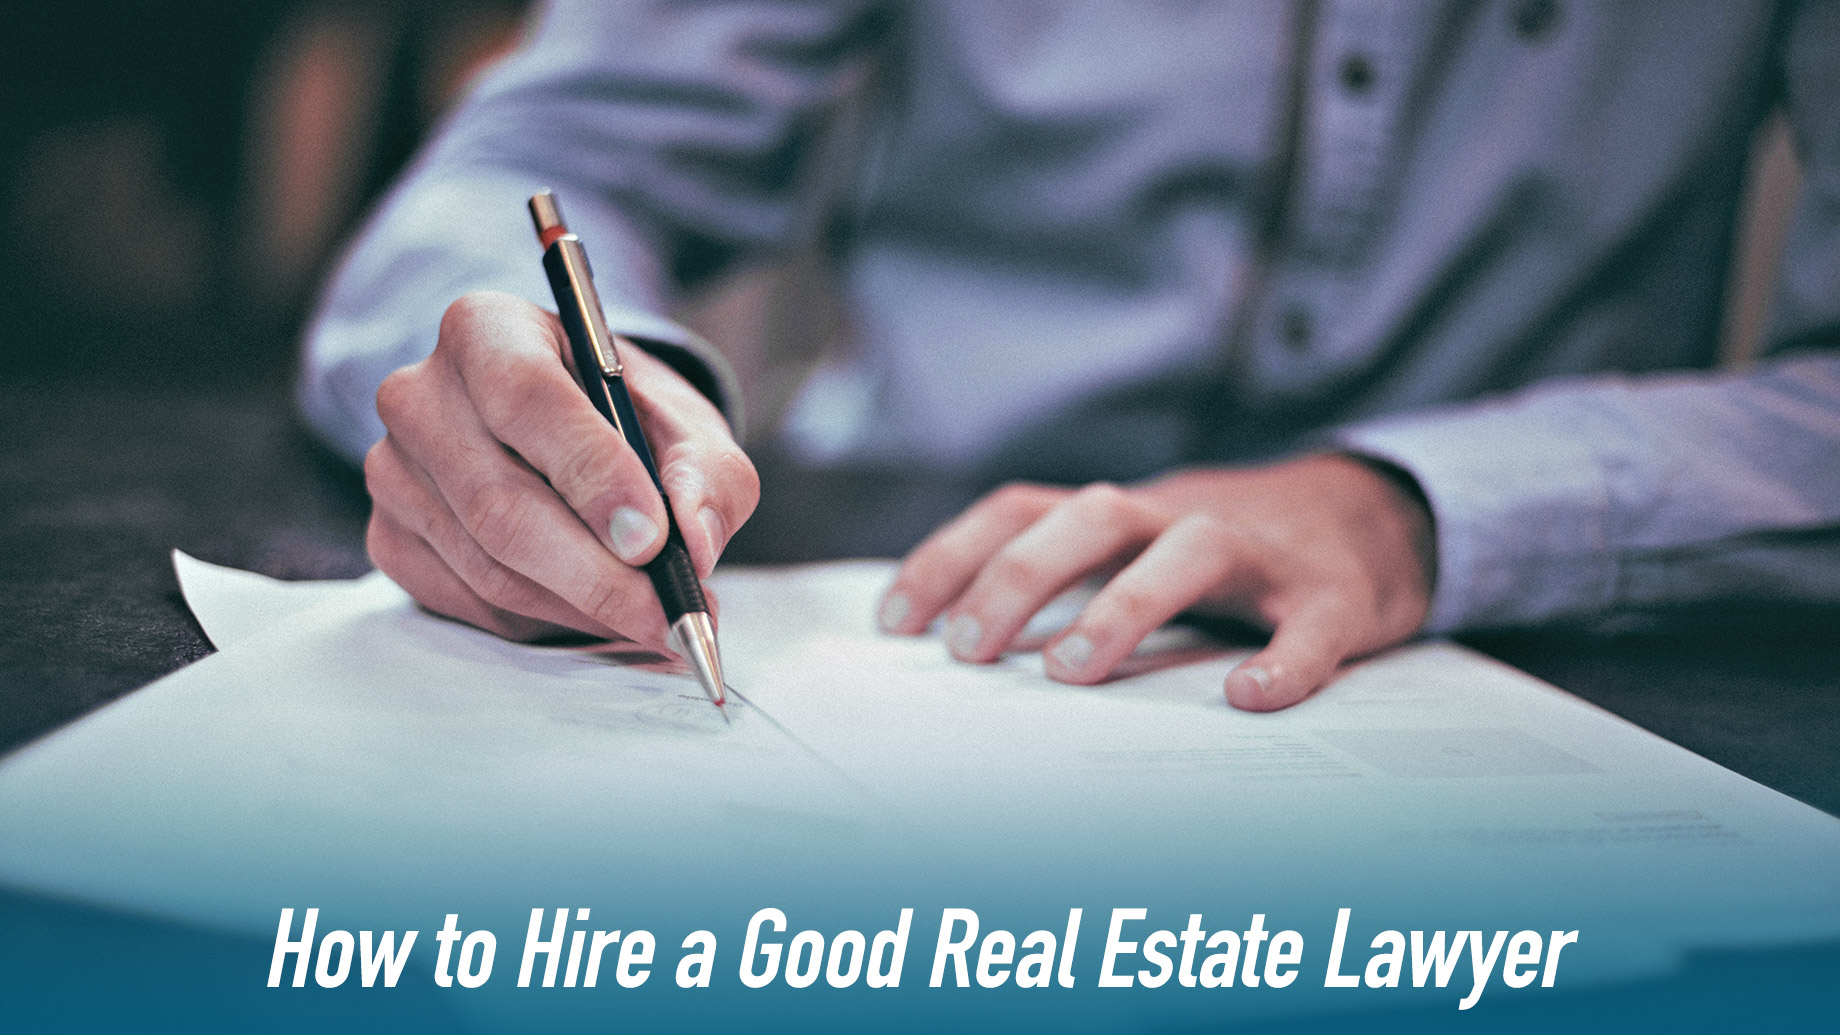 How to Hire a Good Real Estate Lawyer